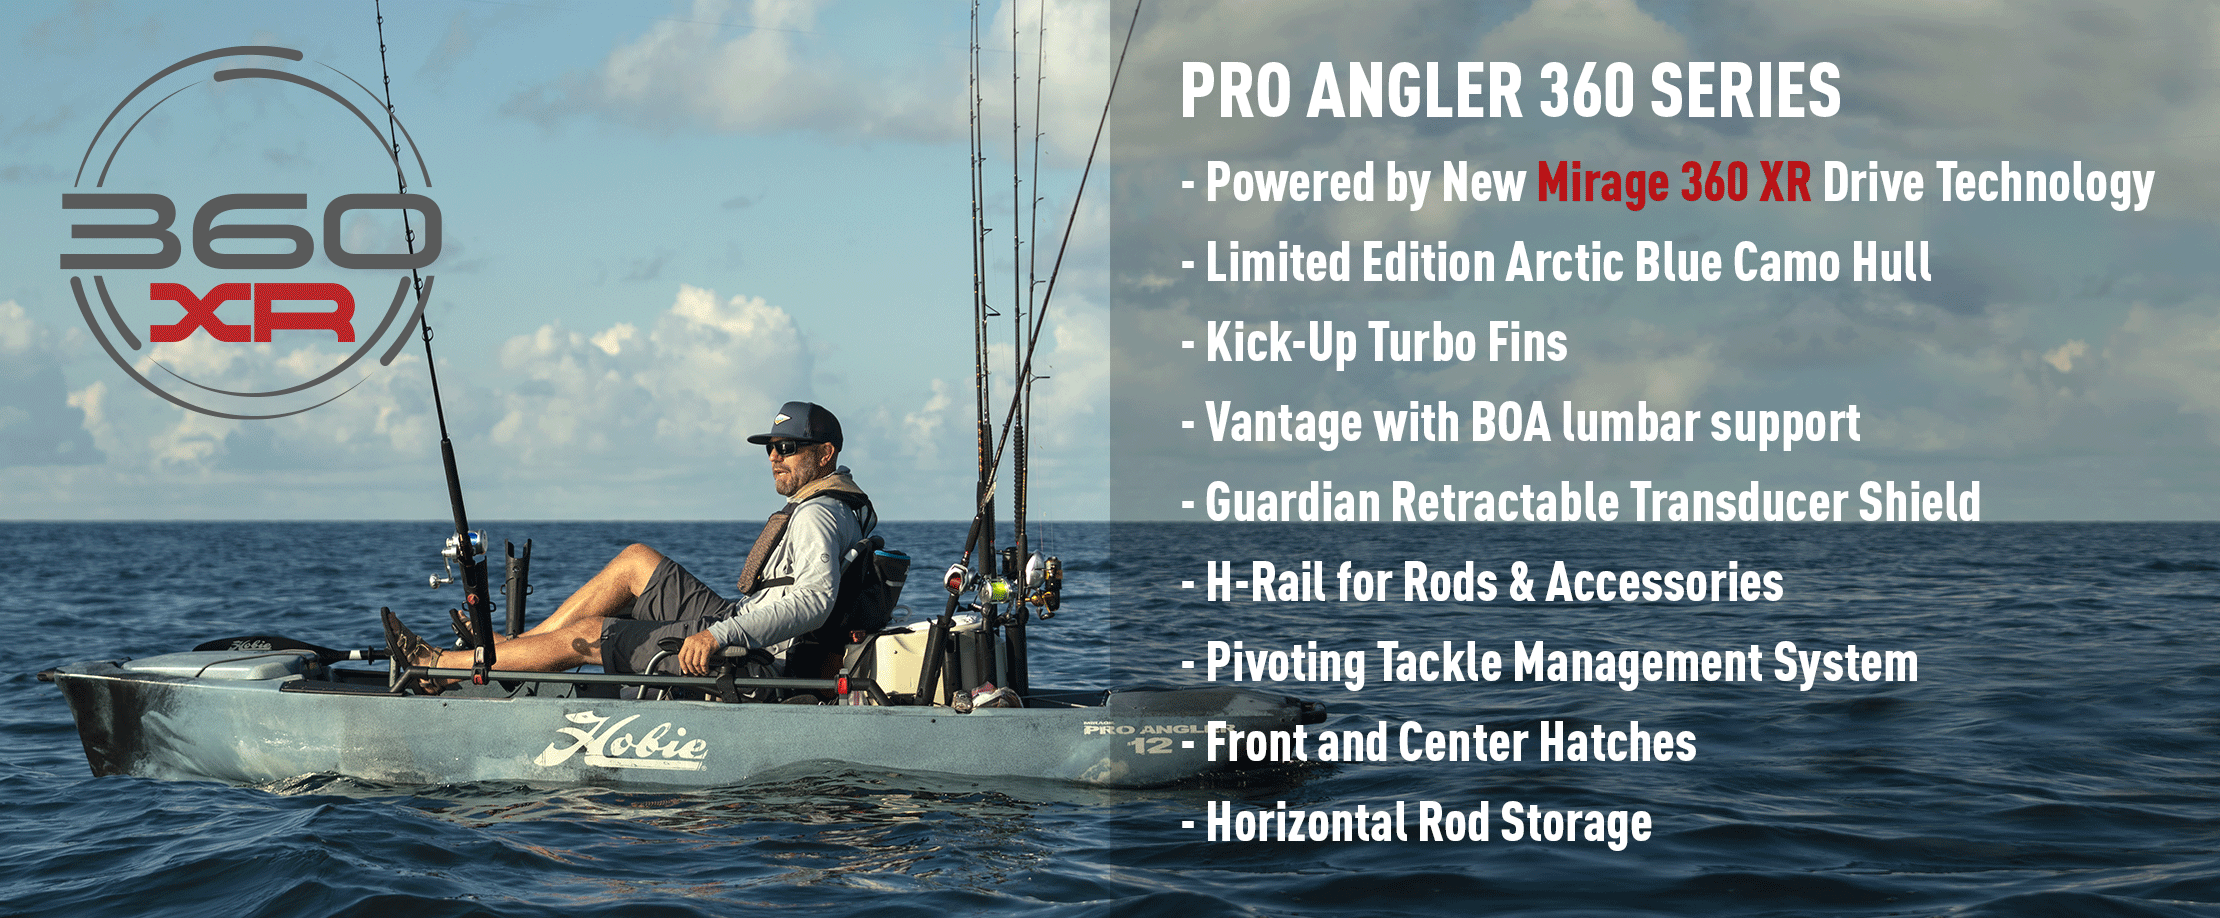 Mirage Pro Angler 14 with 360XR Drive Technology Features